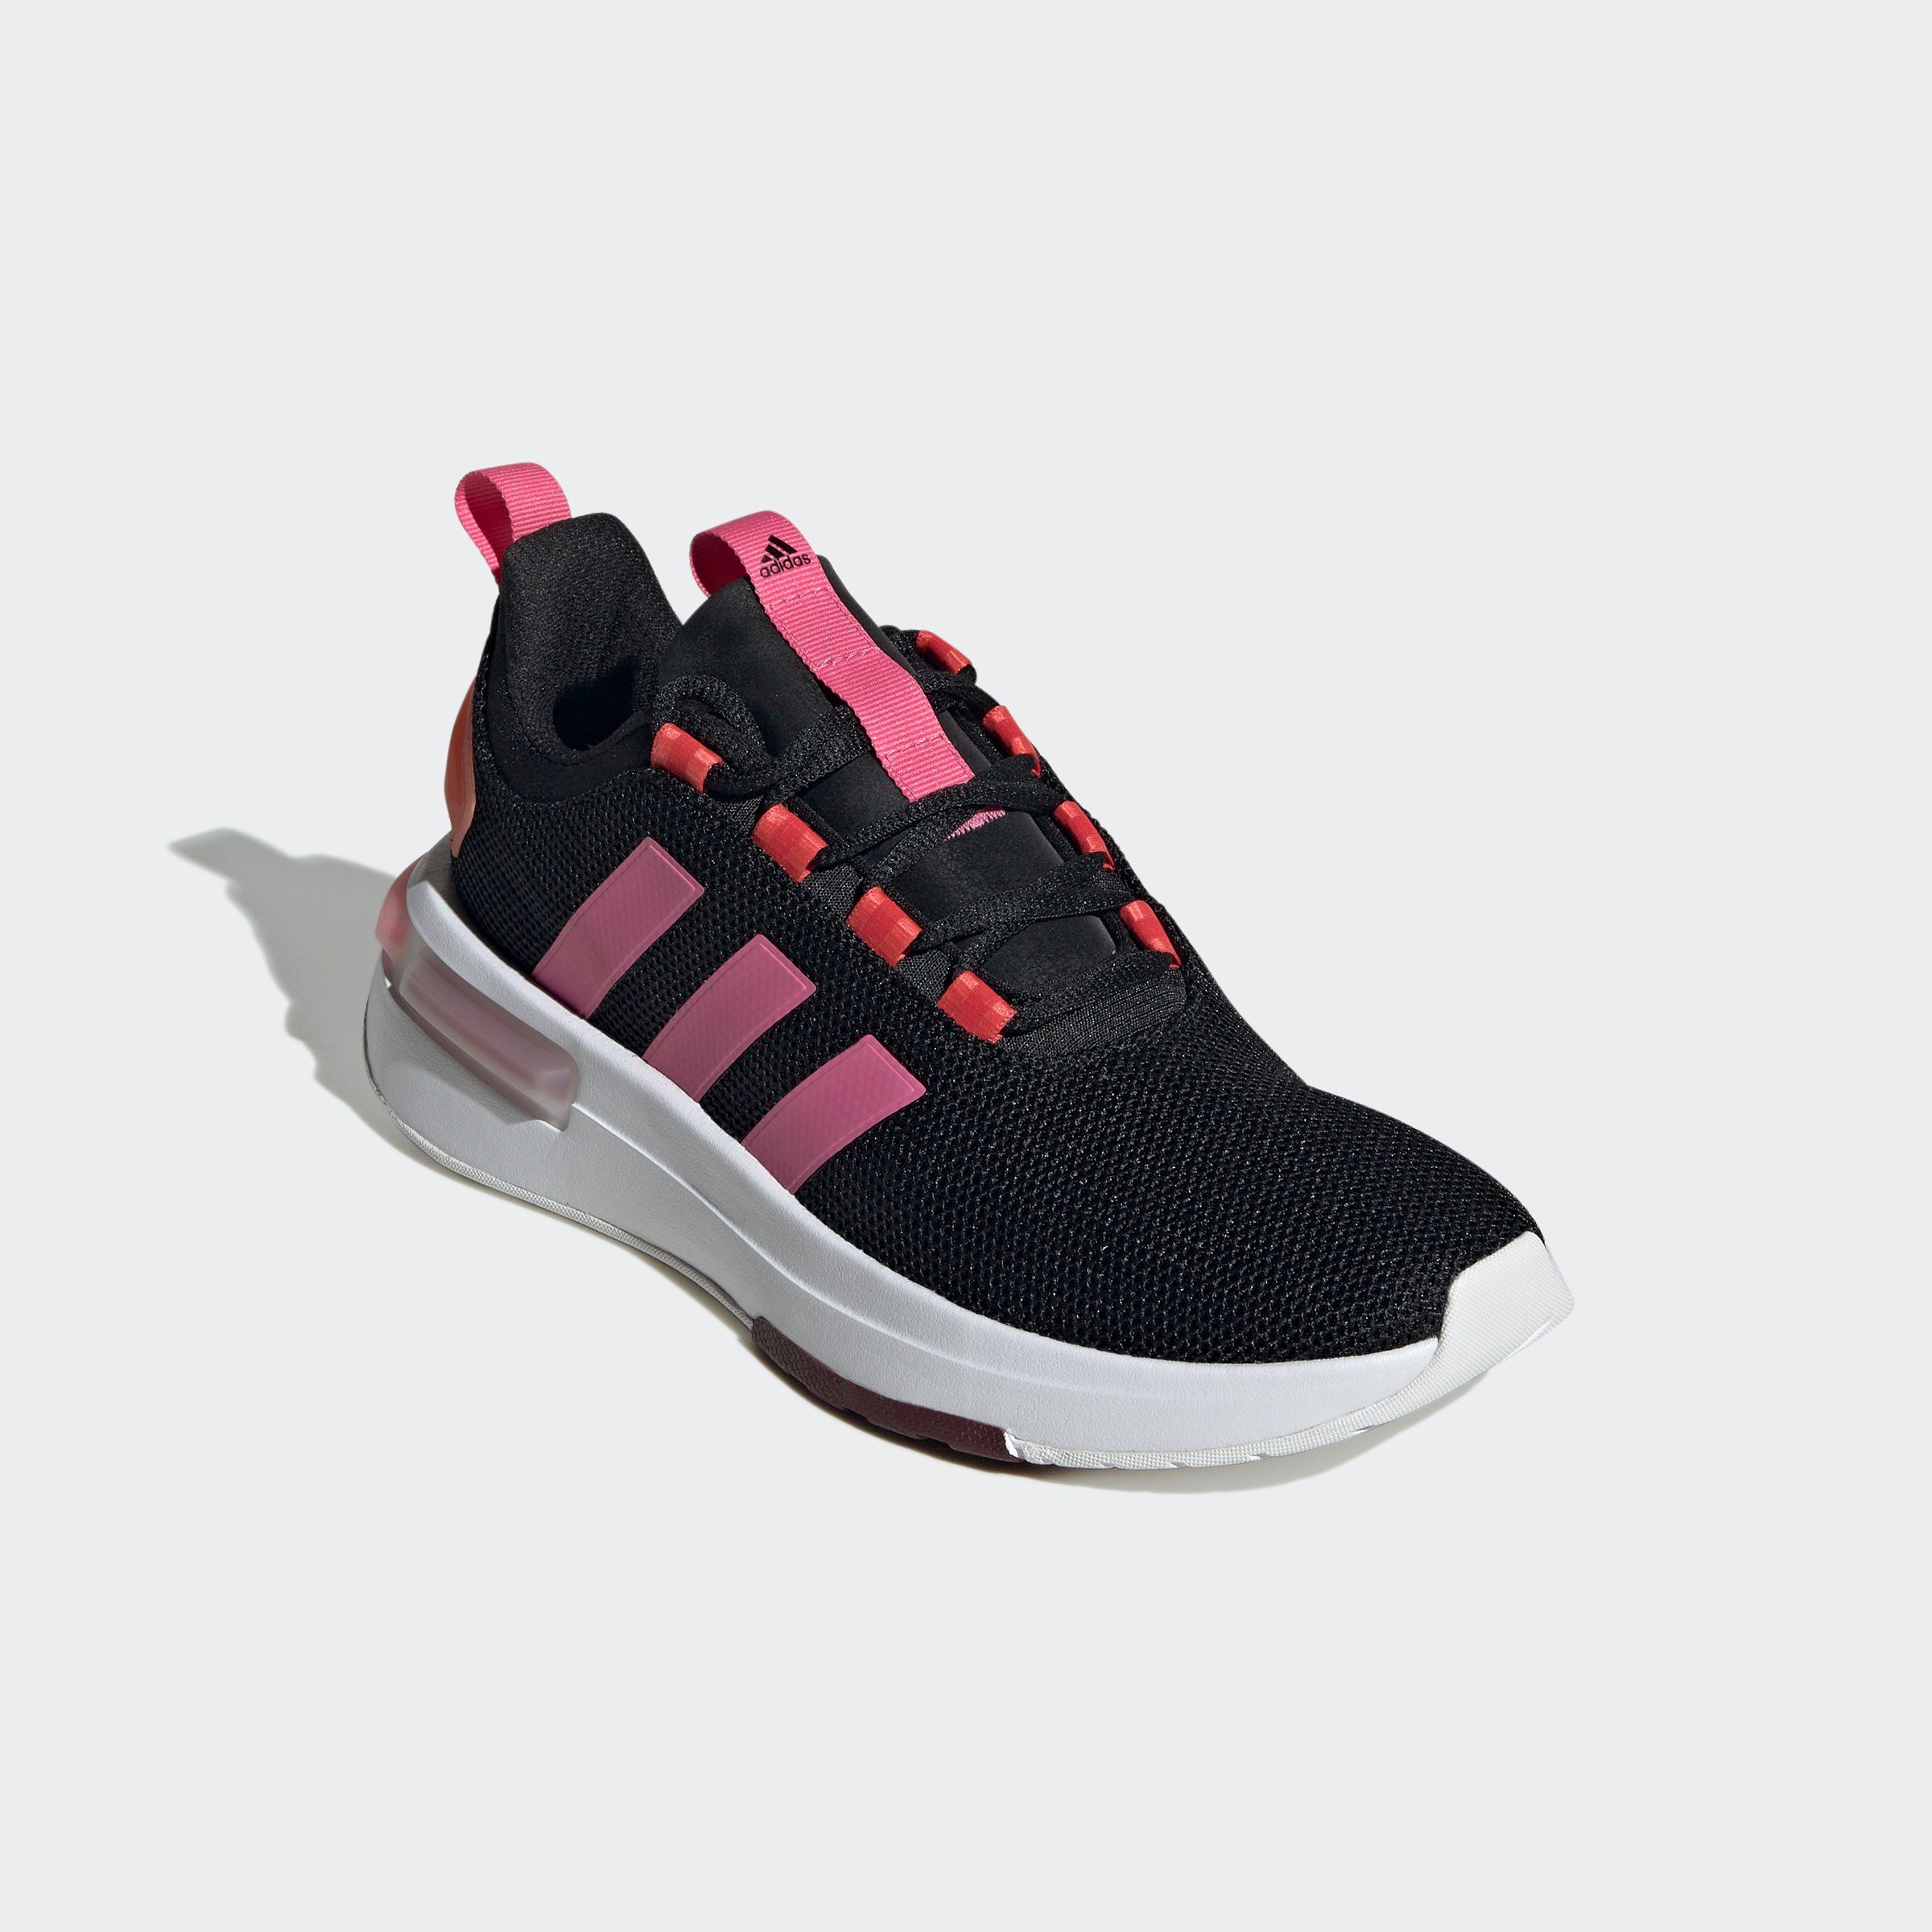 Fusion adidas RACER TR23 Core Pink Sportswear Red / / Black Shadow Sneaker